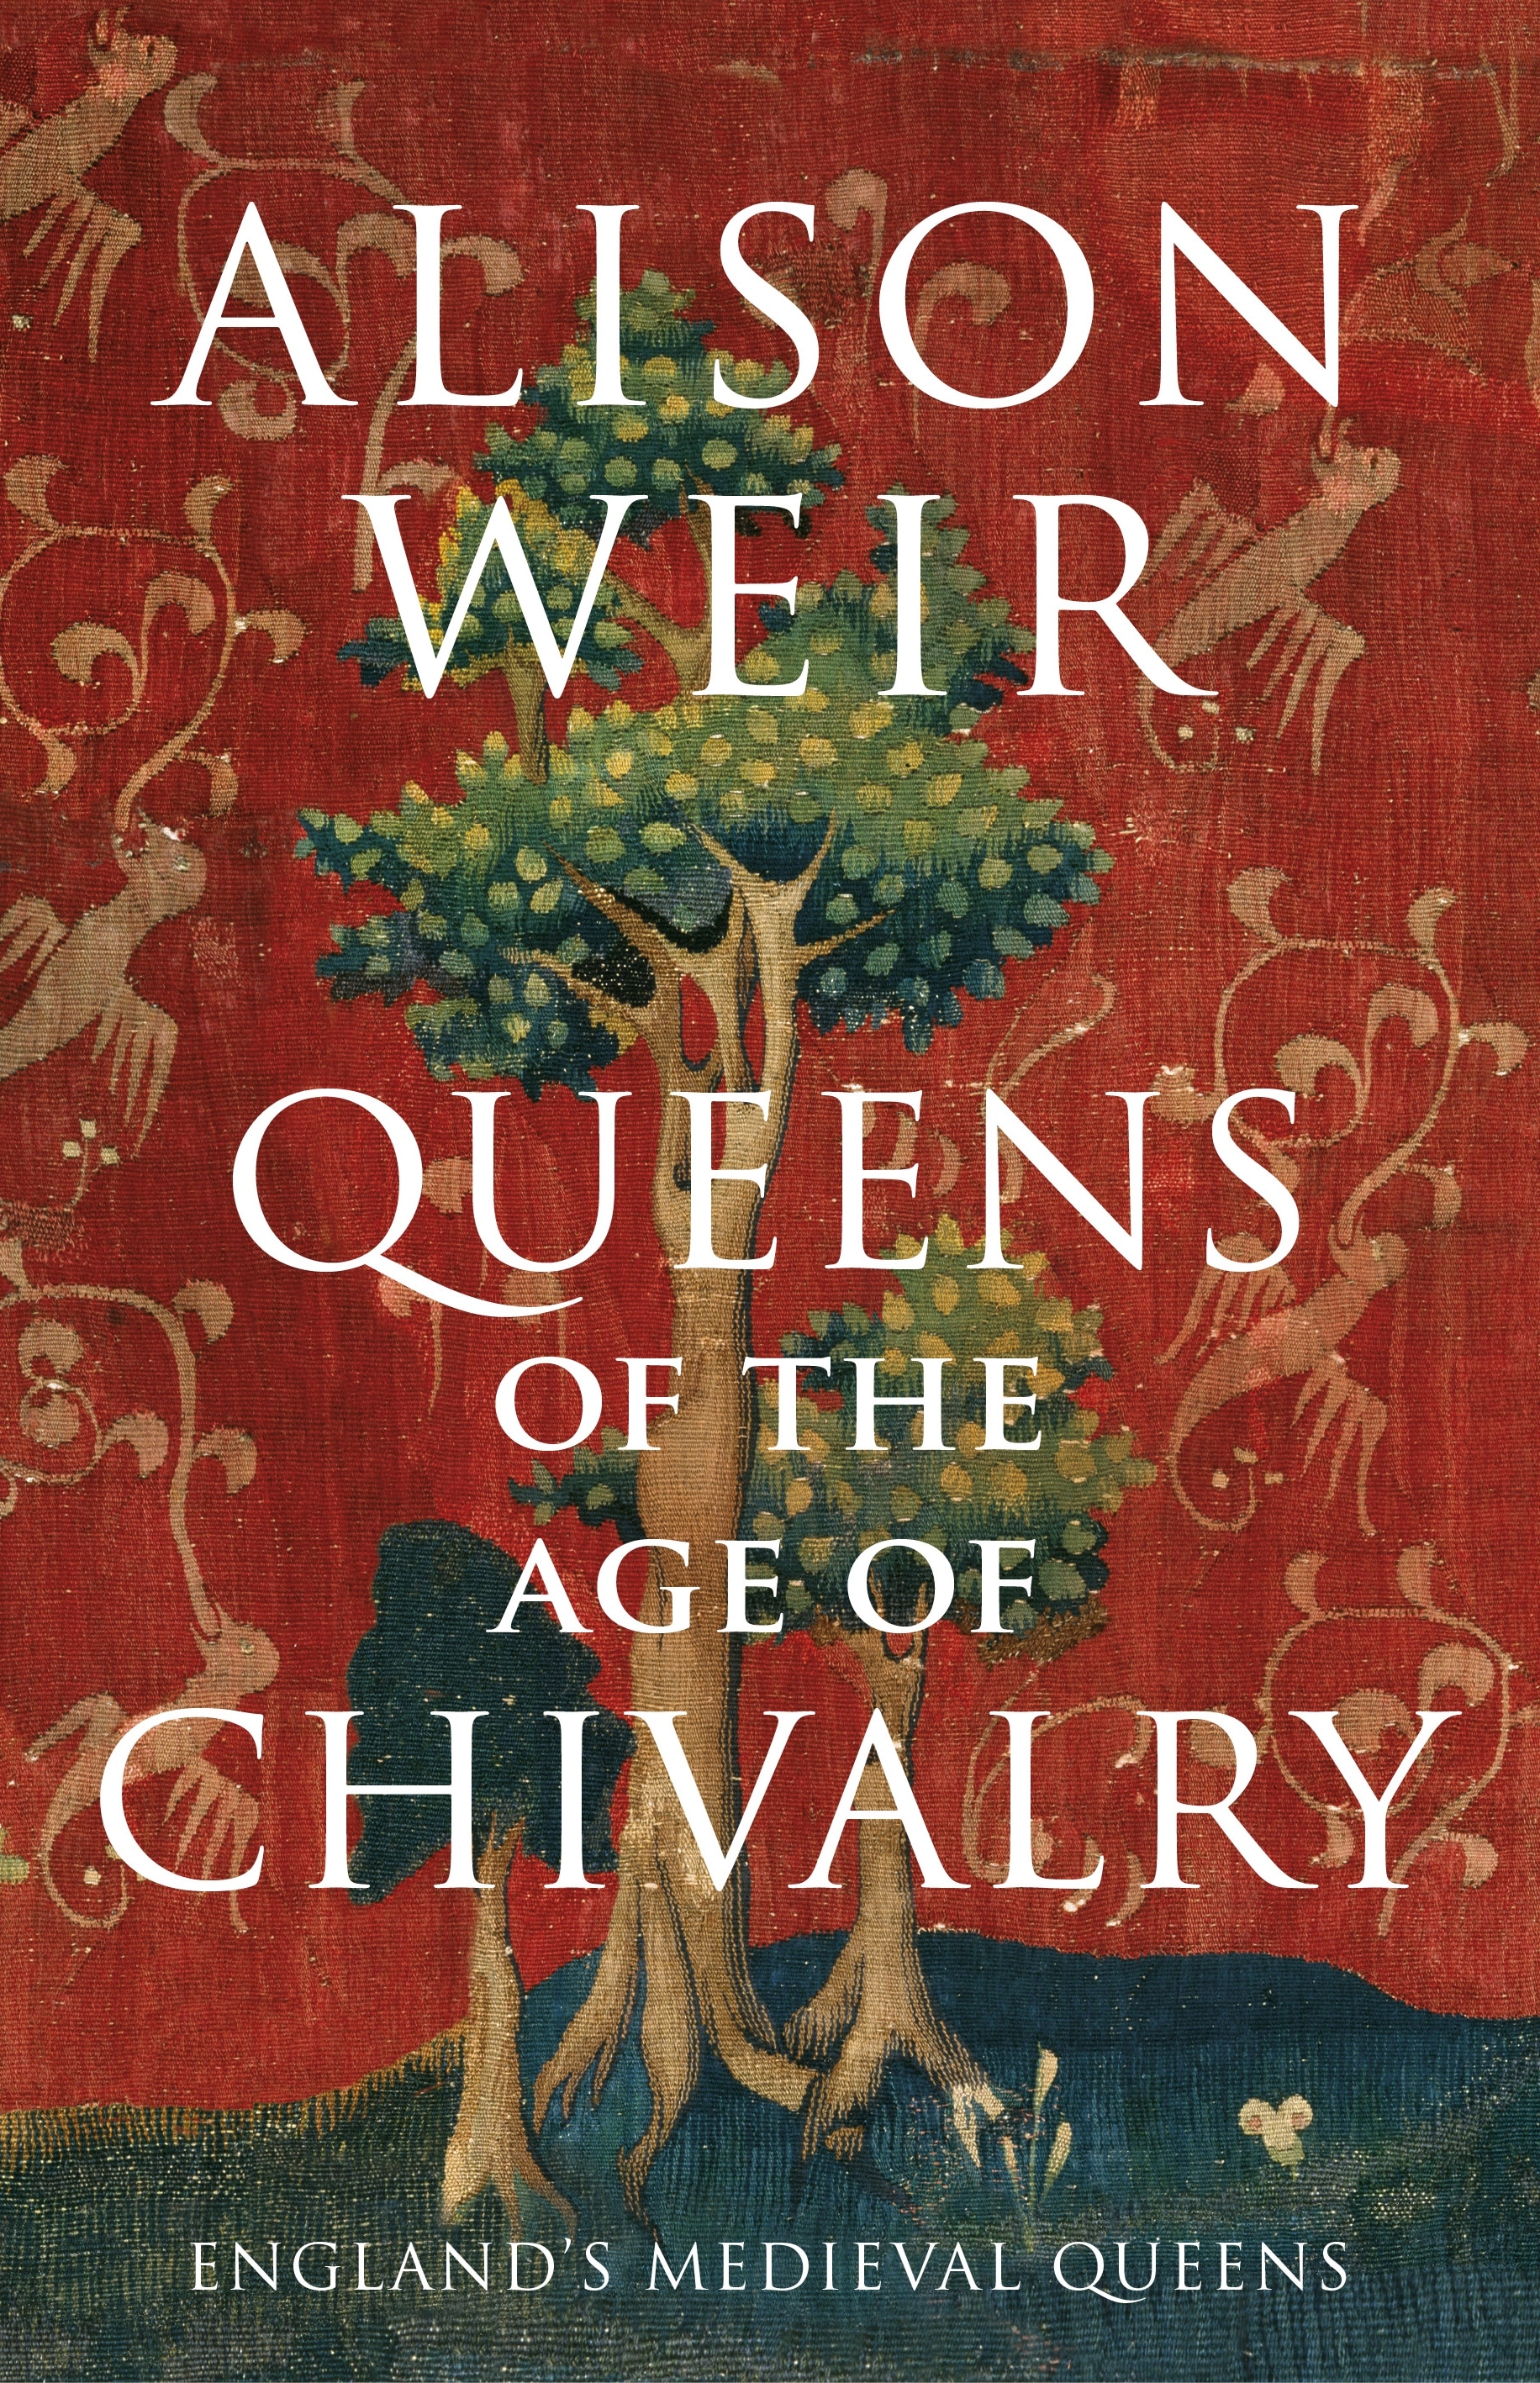 Book “Queens of the Age of Chivalry” by Alison Weir — November 3, 2022